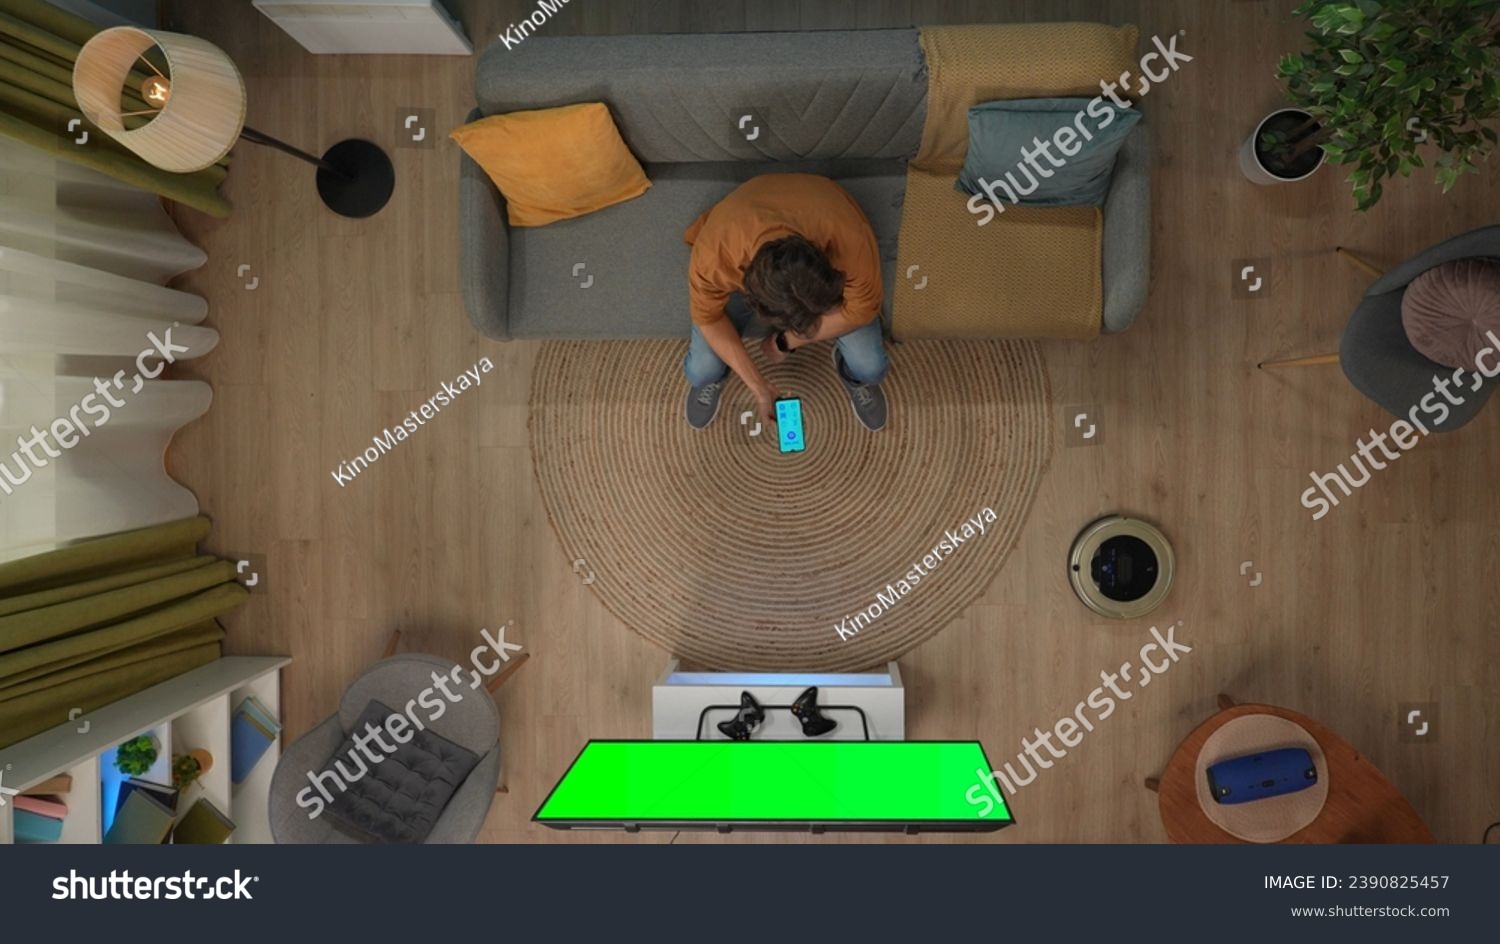 Top view of man sitting on the sofa holding smartphone looking at app for gadgets, tv with chroma key green screen. #2390825457